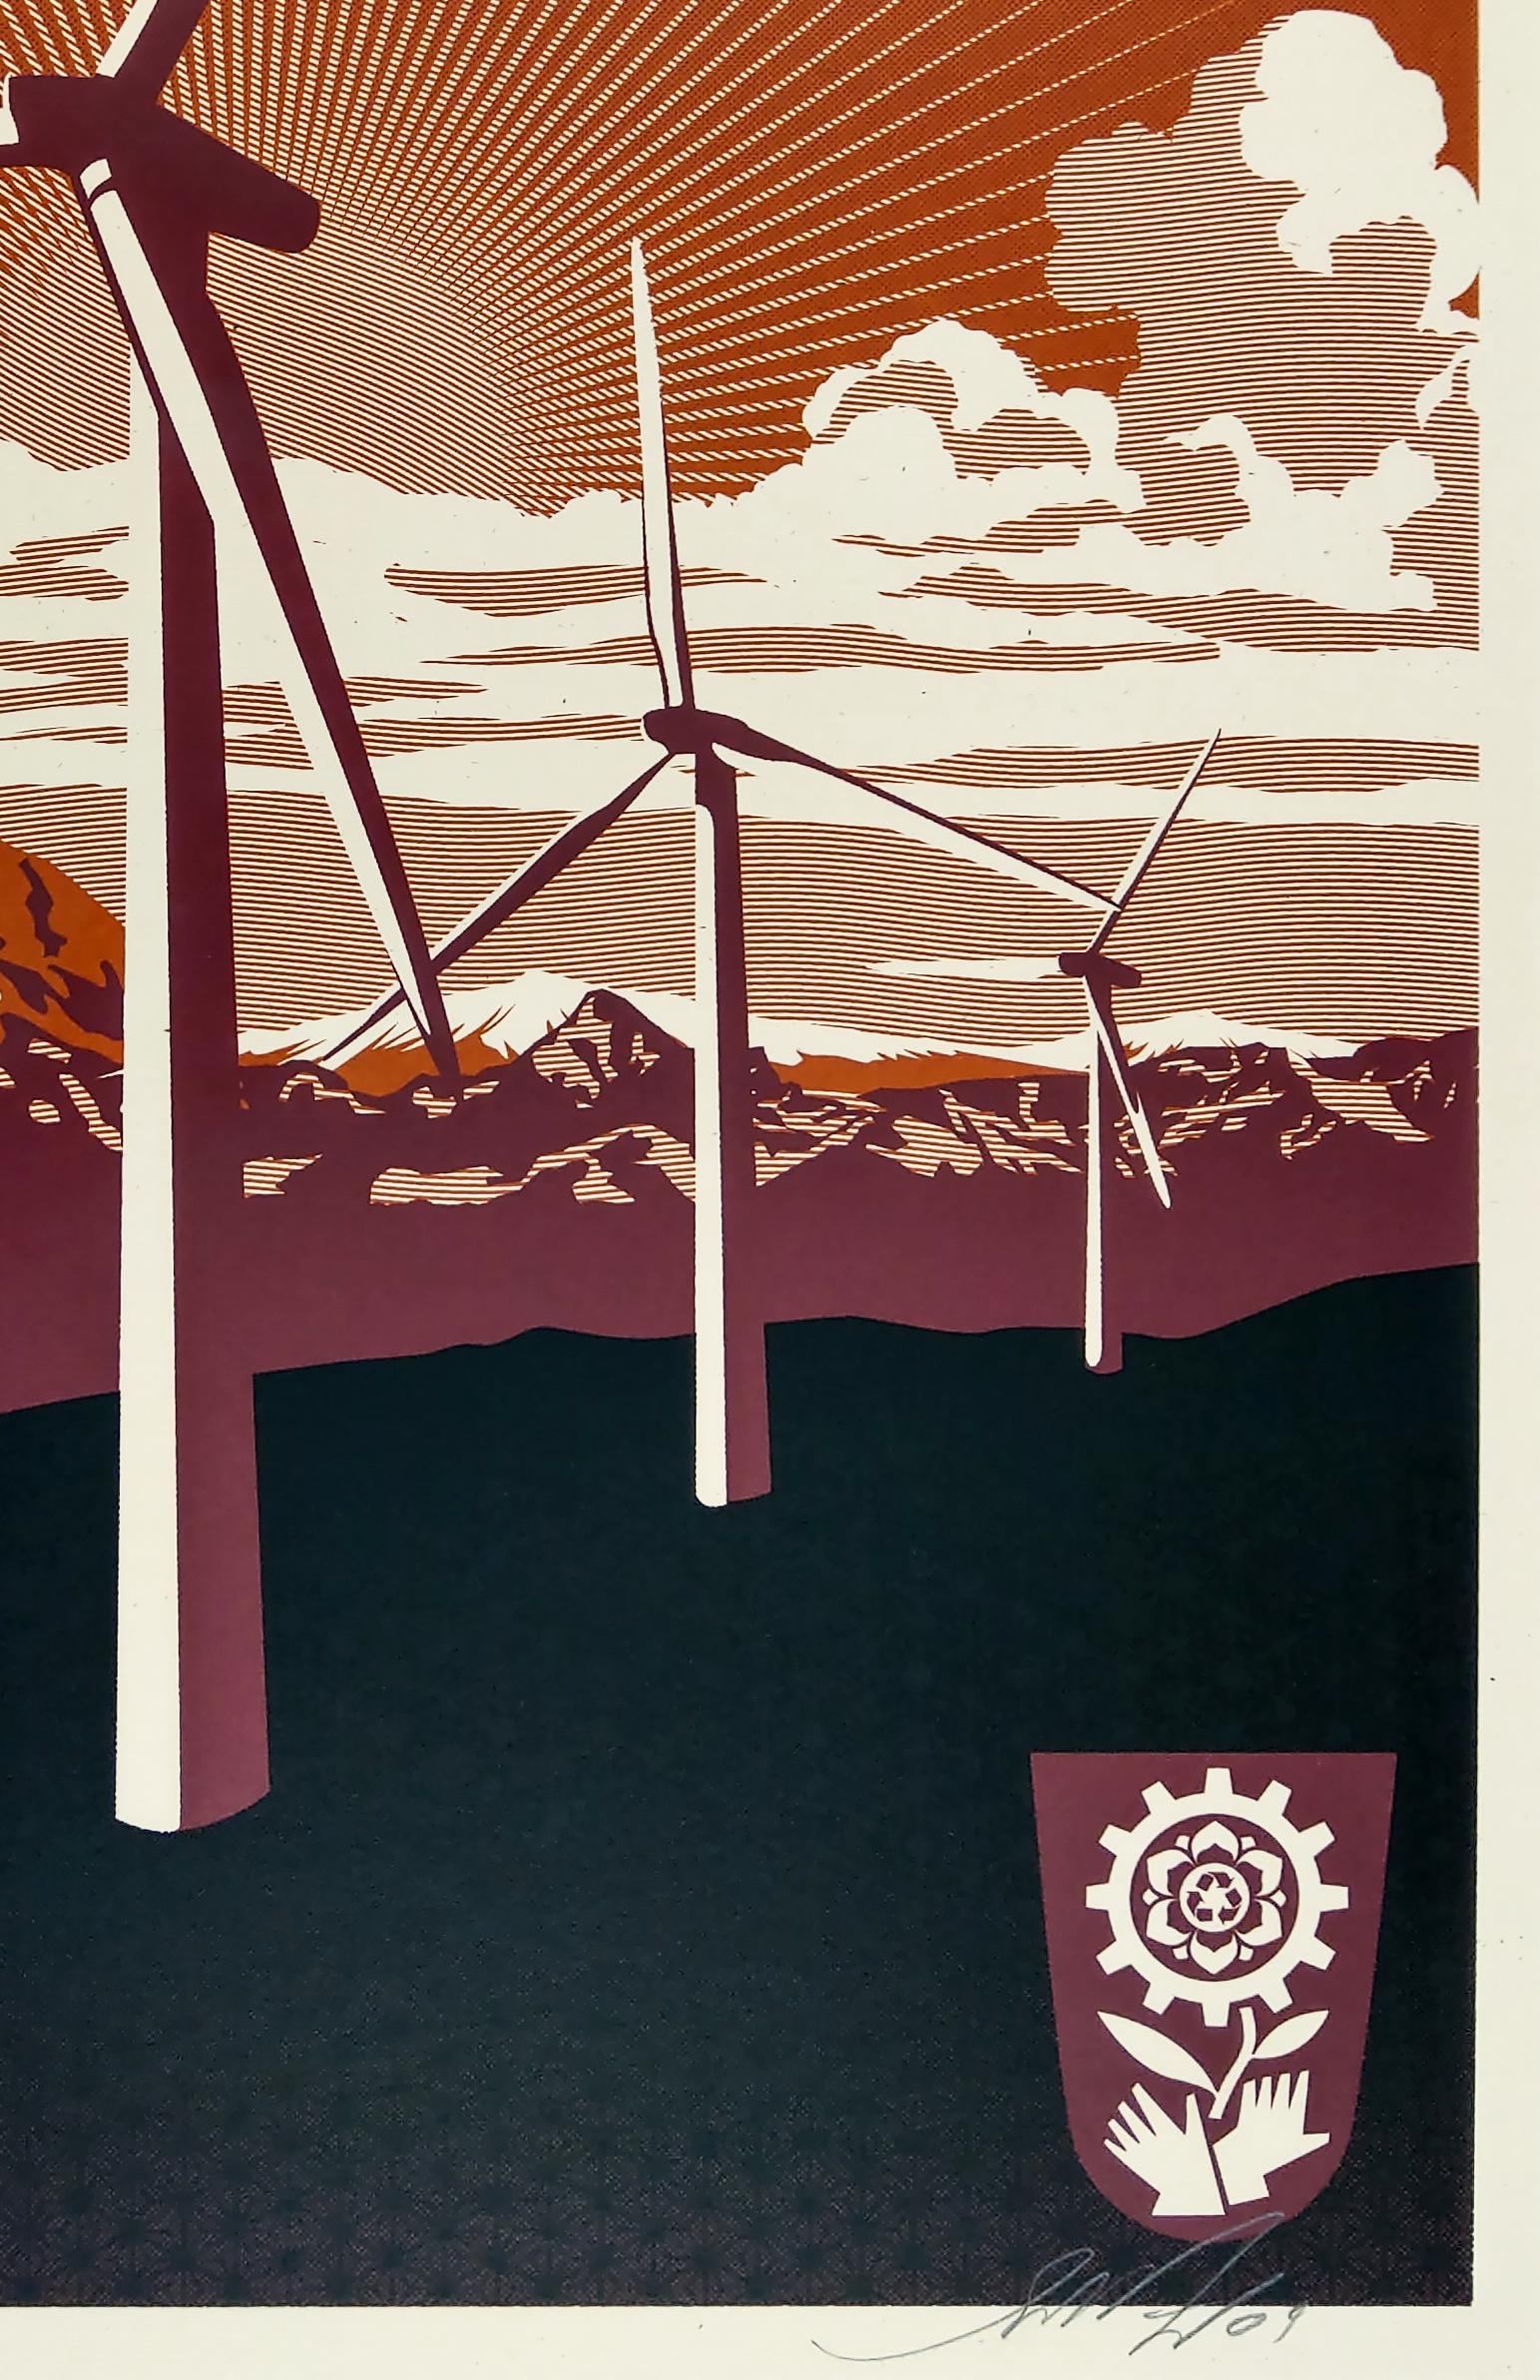  Obey Windmill, 18 inches by 24 inches screen print. Signed by Shepard Fairey. Limited numbered edition of 450 prints.

Shepard created this image with the hope that it will be part of some Green Energy Initiatives in the near future.  Keep a look